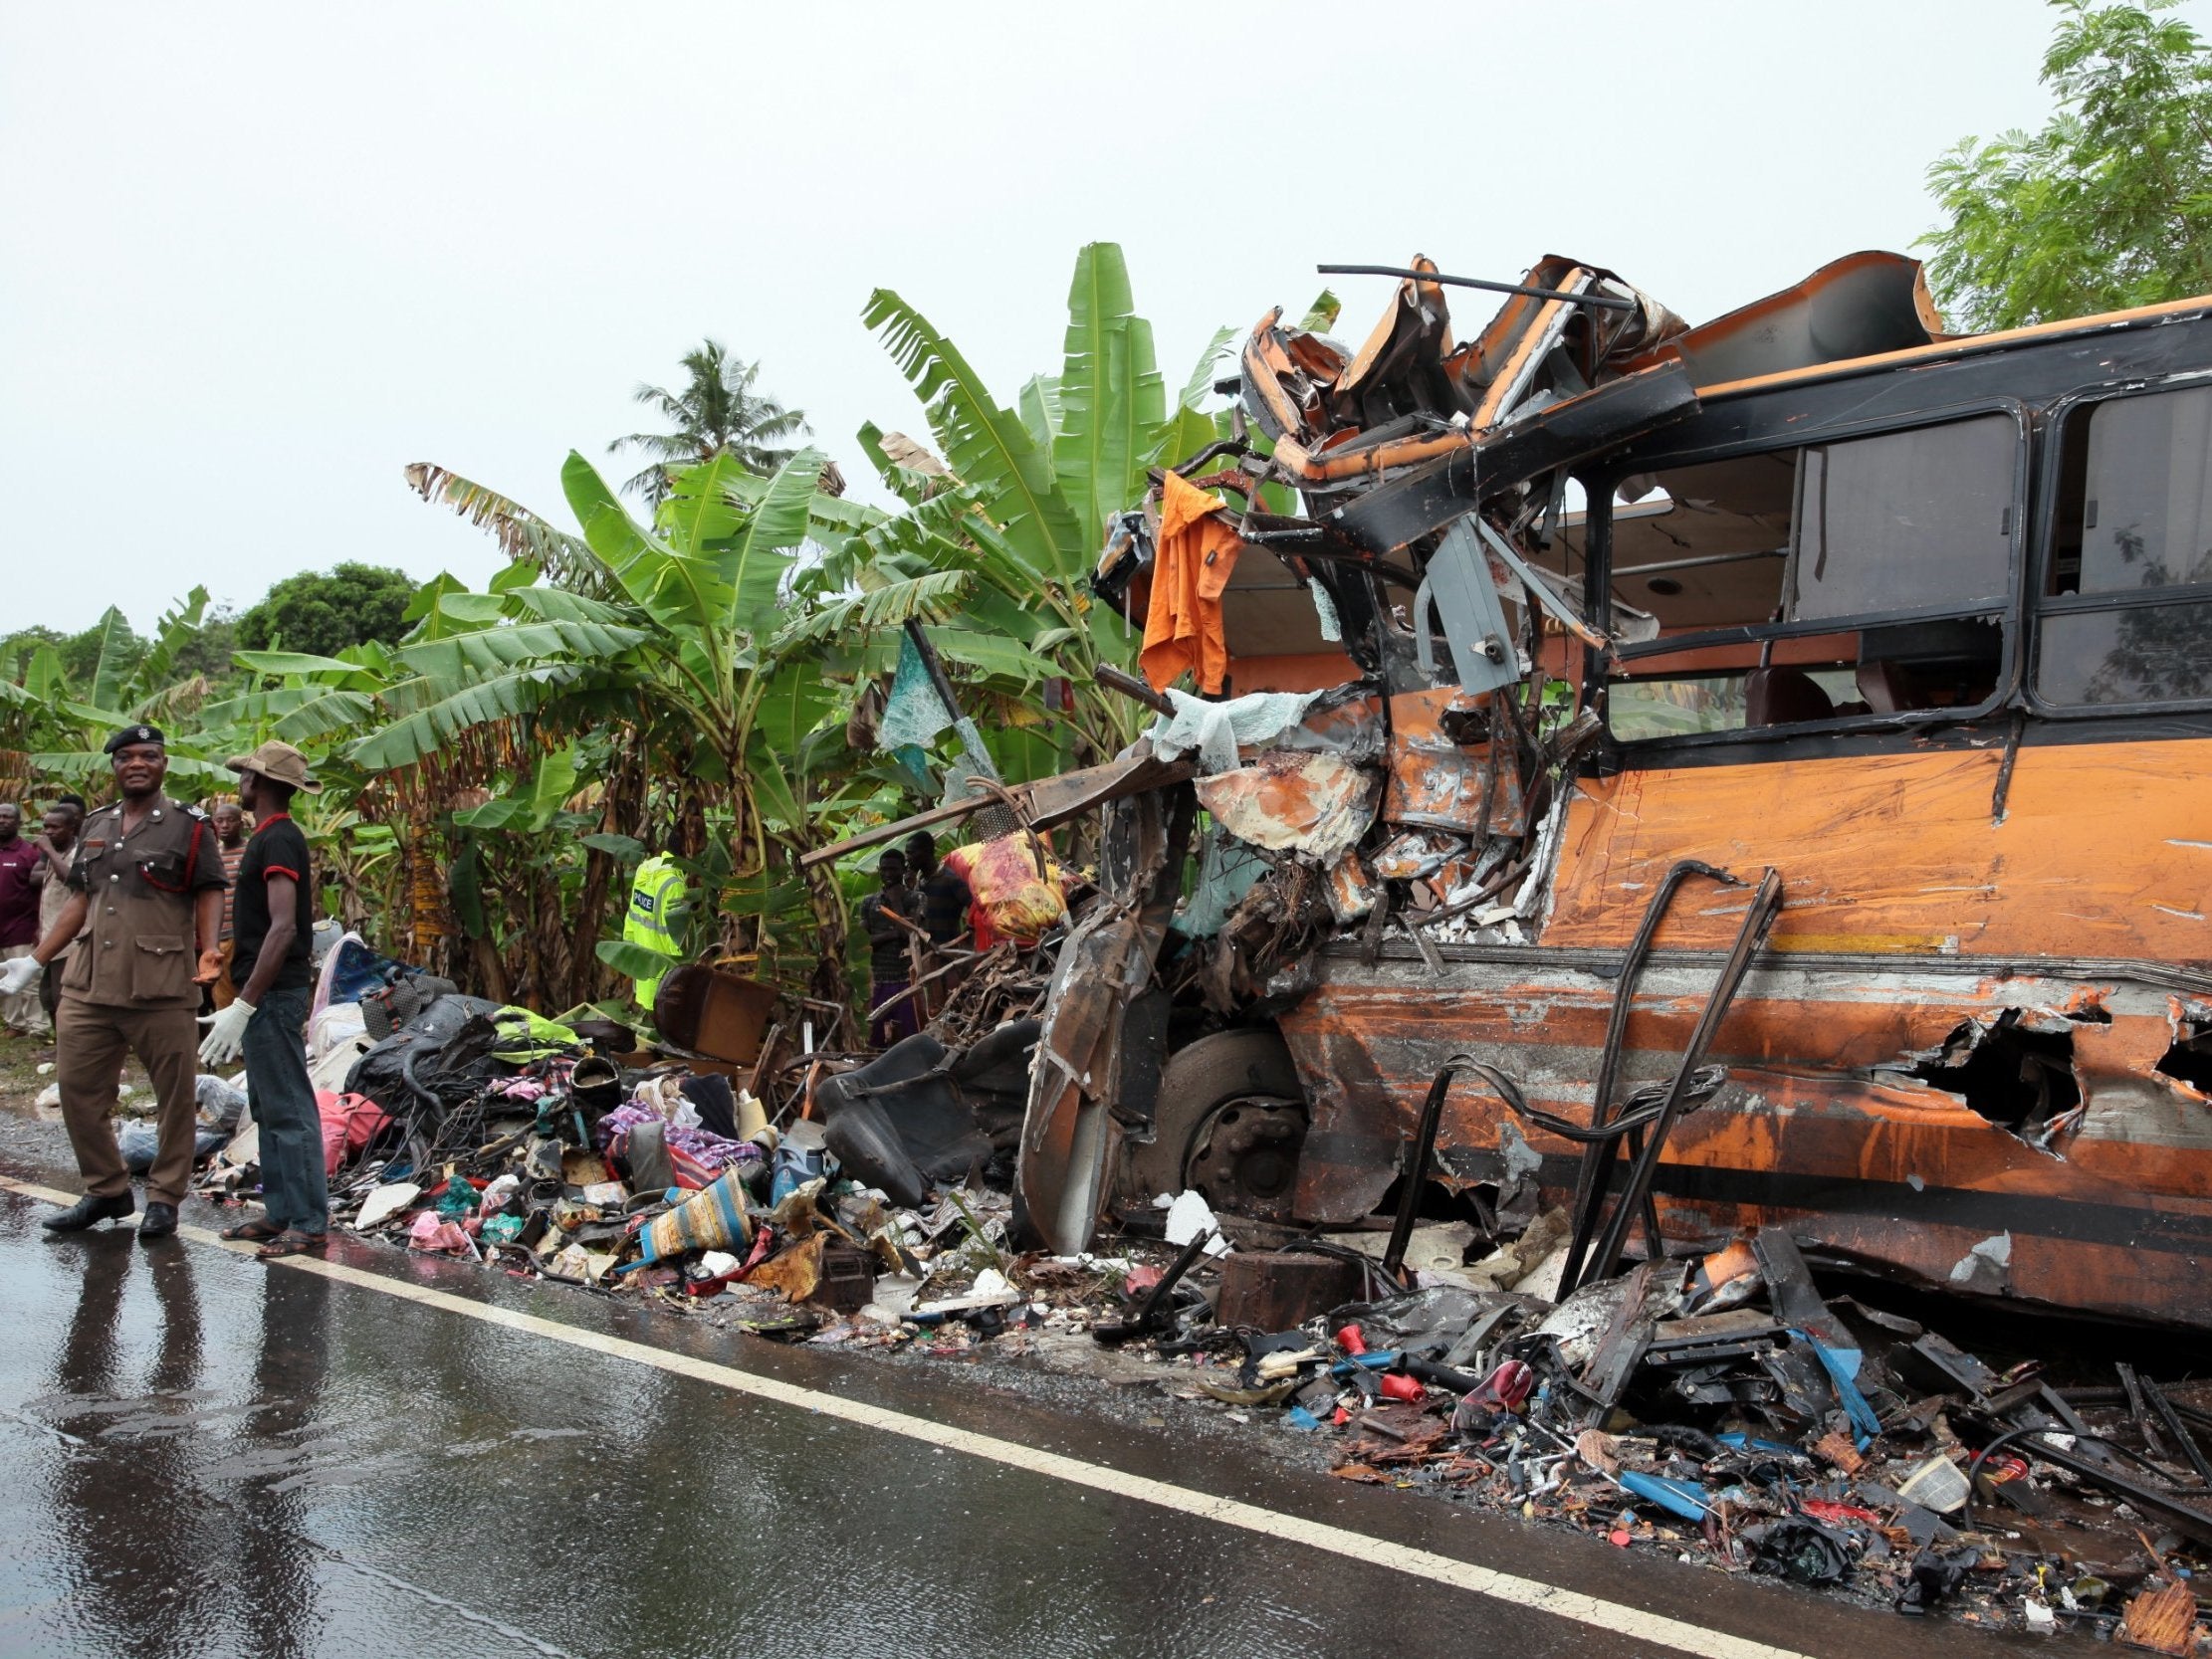 Ghana Bus Crash At Least 60 Killed After Two Loaded Coaches Collide The Independent